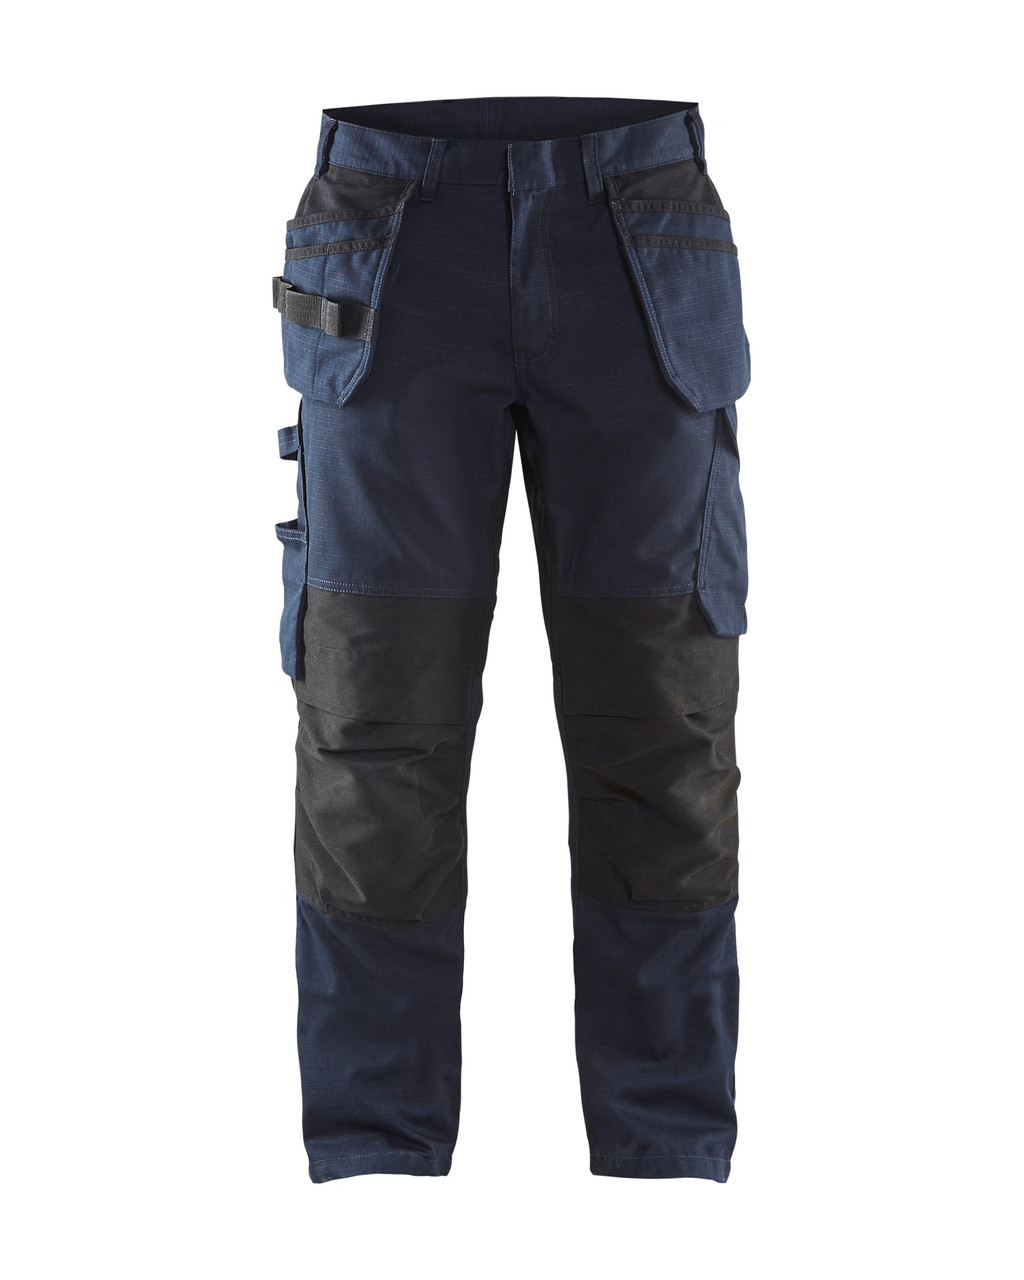 BLAKLADER Trousers 1496 with Kneepad Pockets  for BLAKLADER Trousers | 1496 Mens Service Dark Navy Blue Trousers with Kneepad Pockets and Holster Pockets Rip-Stop with Stretch that have Configuration available in Carpentry